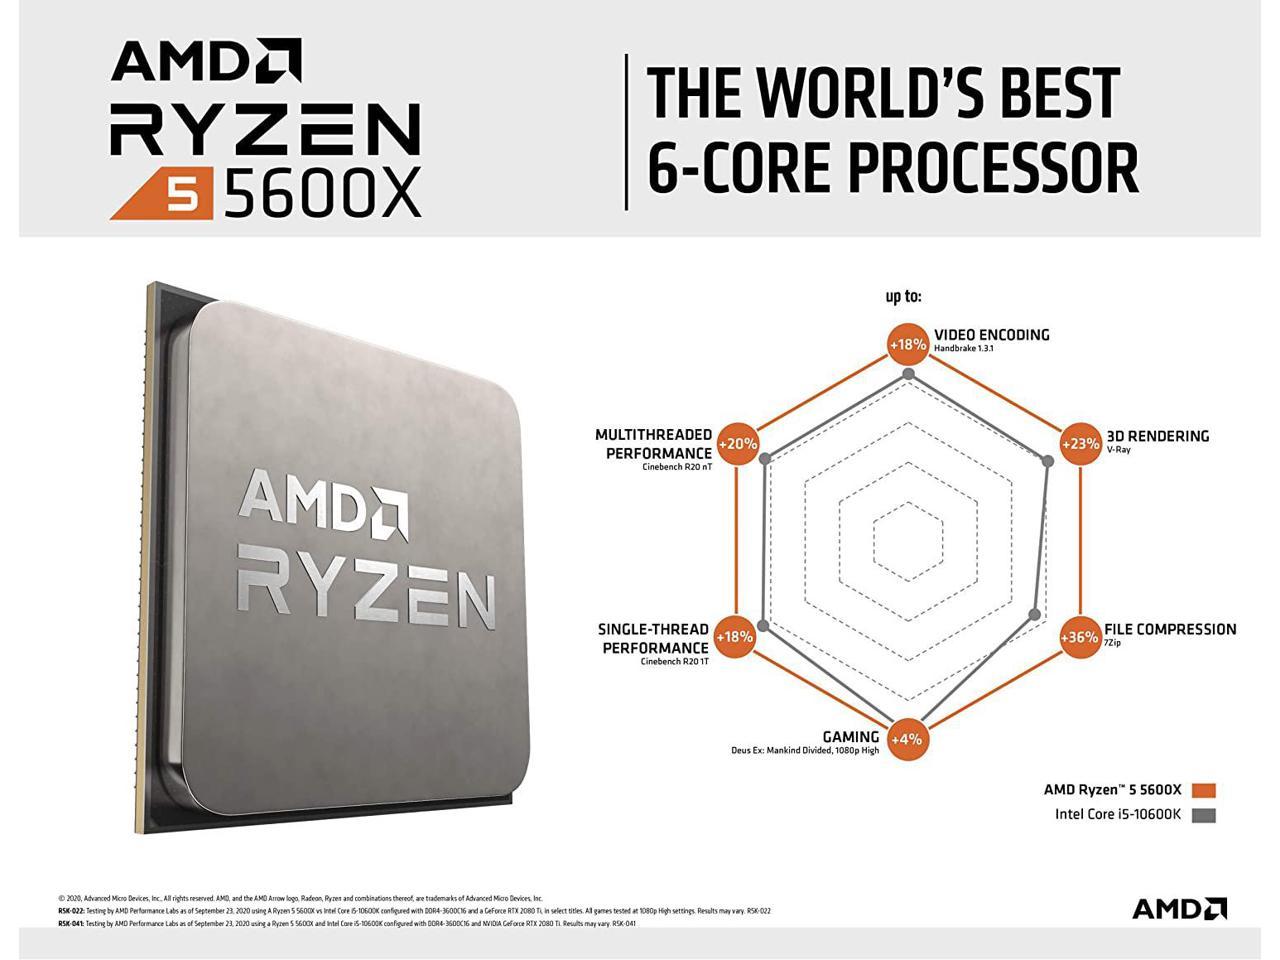 AMD CPU Ryzen 5 5600X Tray Pack [3.70~4.70 GHz, 6 Cores, 12 Threads, 32MB L3 Cache, 3MB L2 Cache, 7nm, Zen 3, AM4, Support DDR4] 